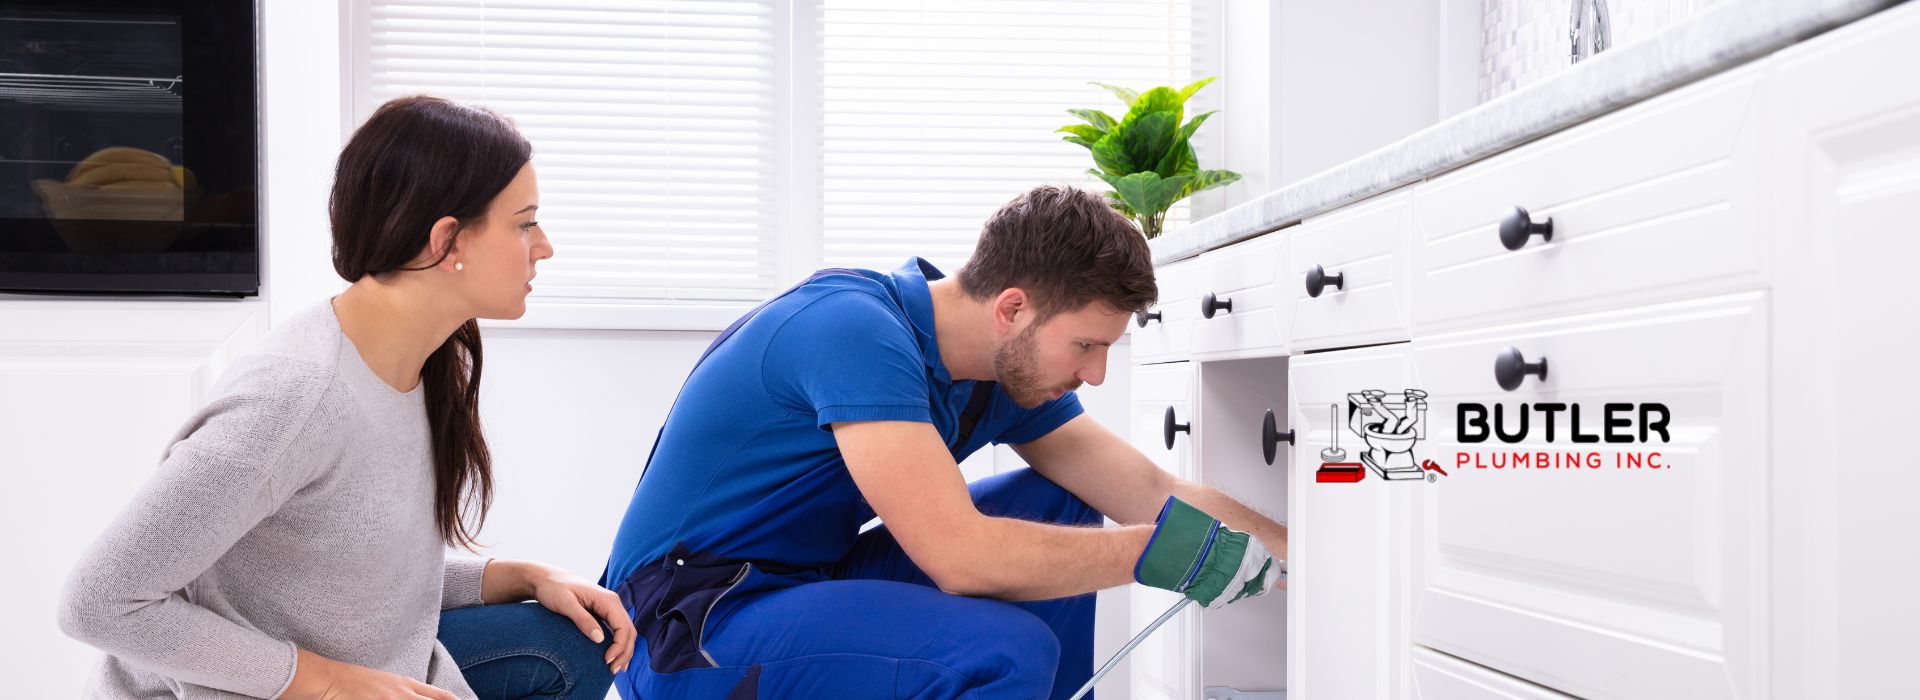 how to choose the right plumbers for you